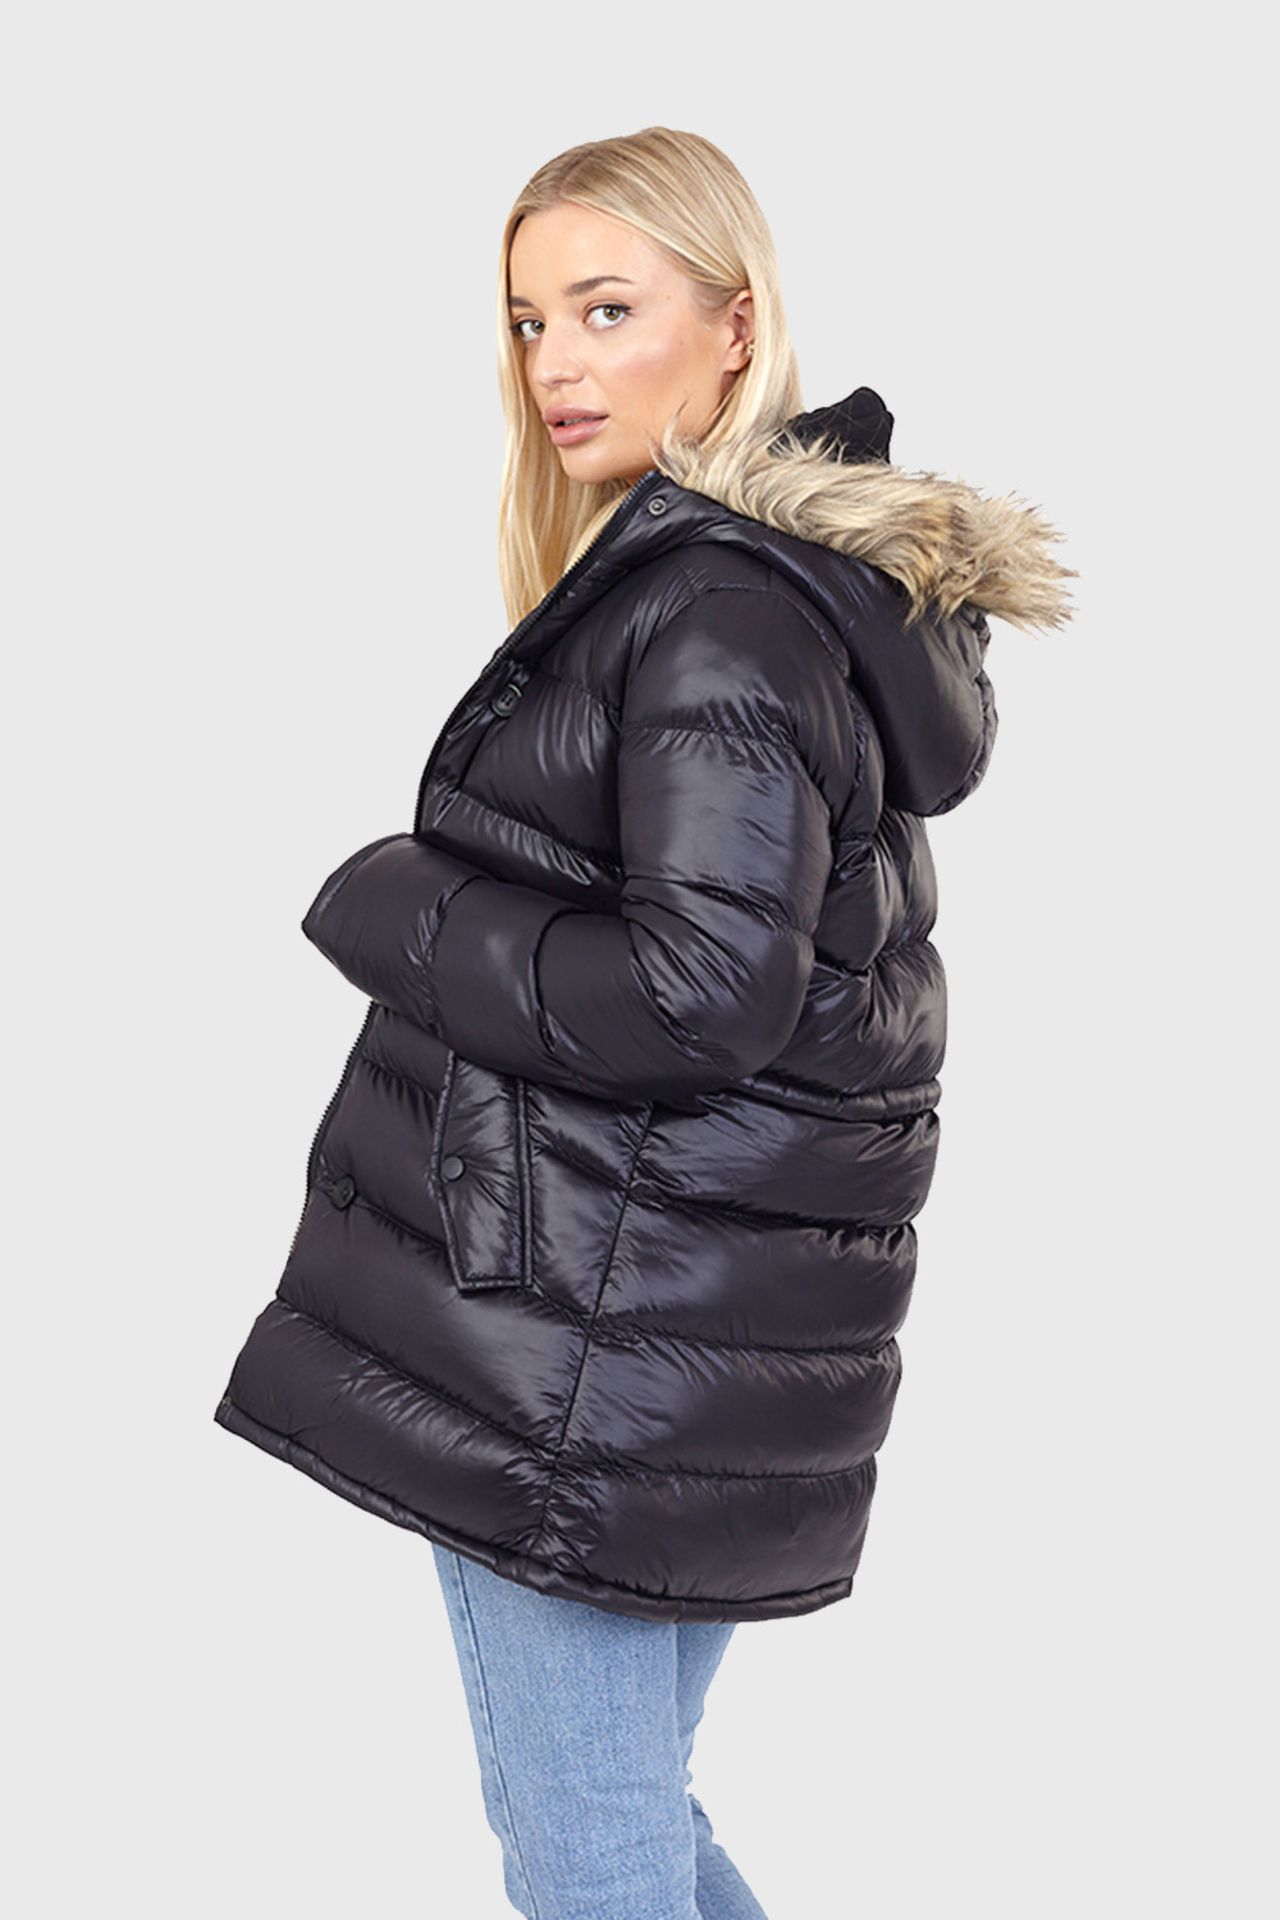 5 X BRAND NEW BRAVE SOUL WOMEN'S PUFFER STYLE FAUX FUR HOODED JACKET'S IN BLACK SIZES 2 UK 10 , 1 UK - Image 2 of 2